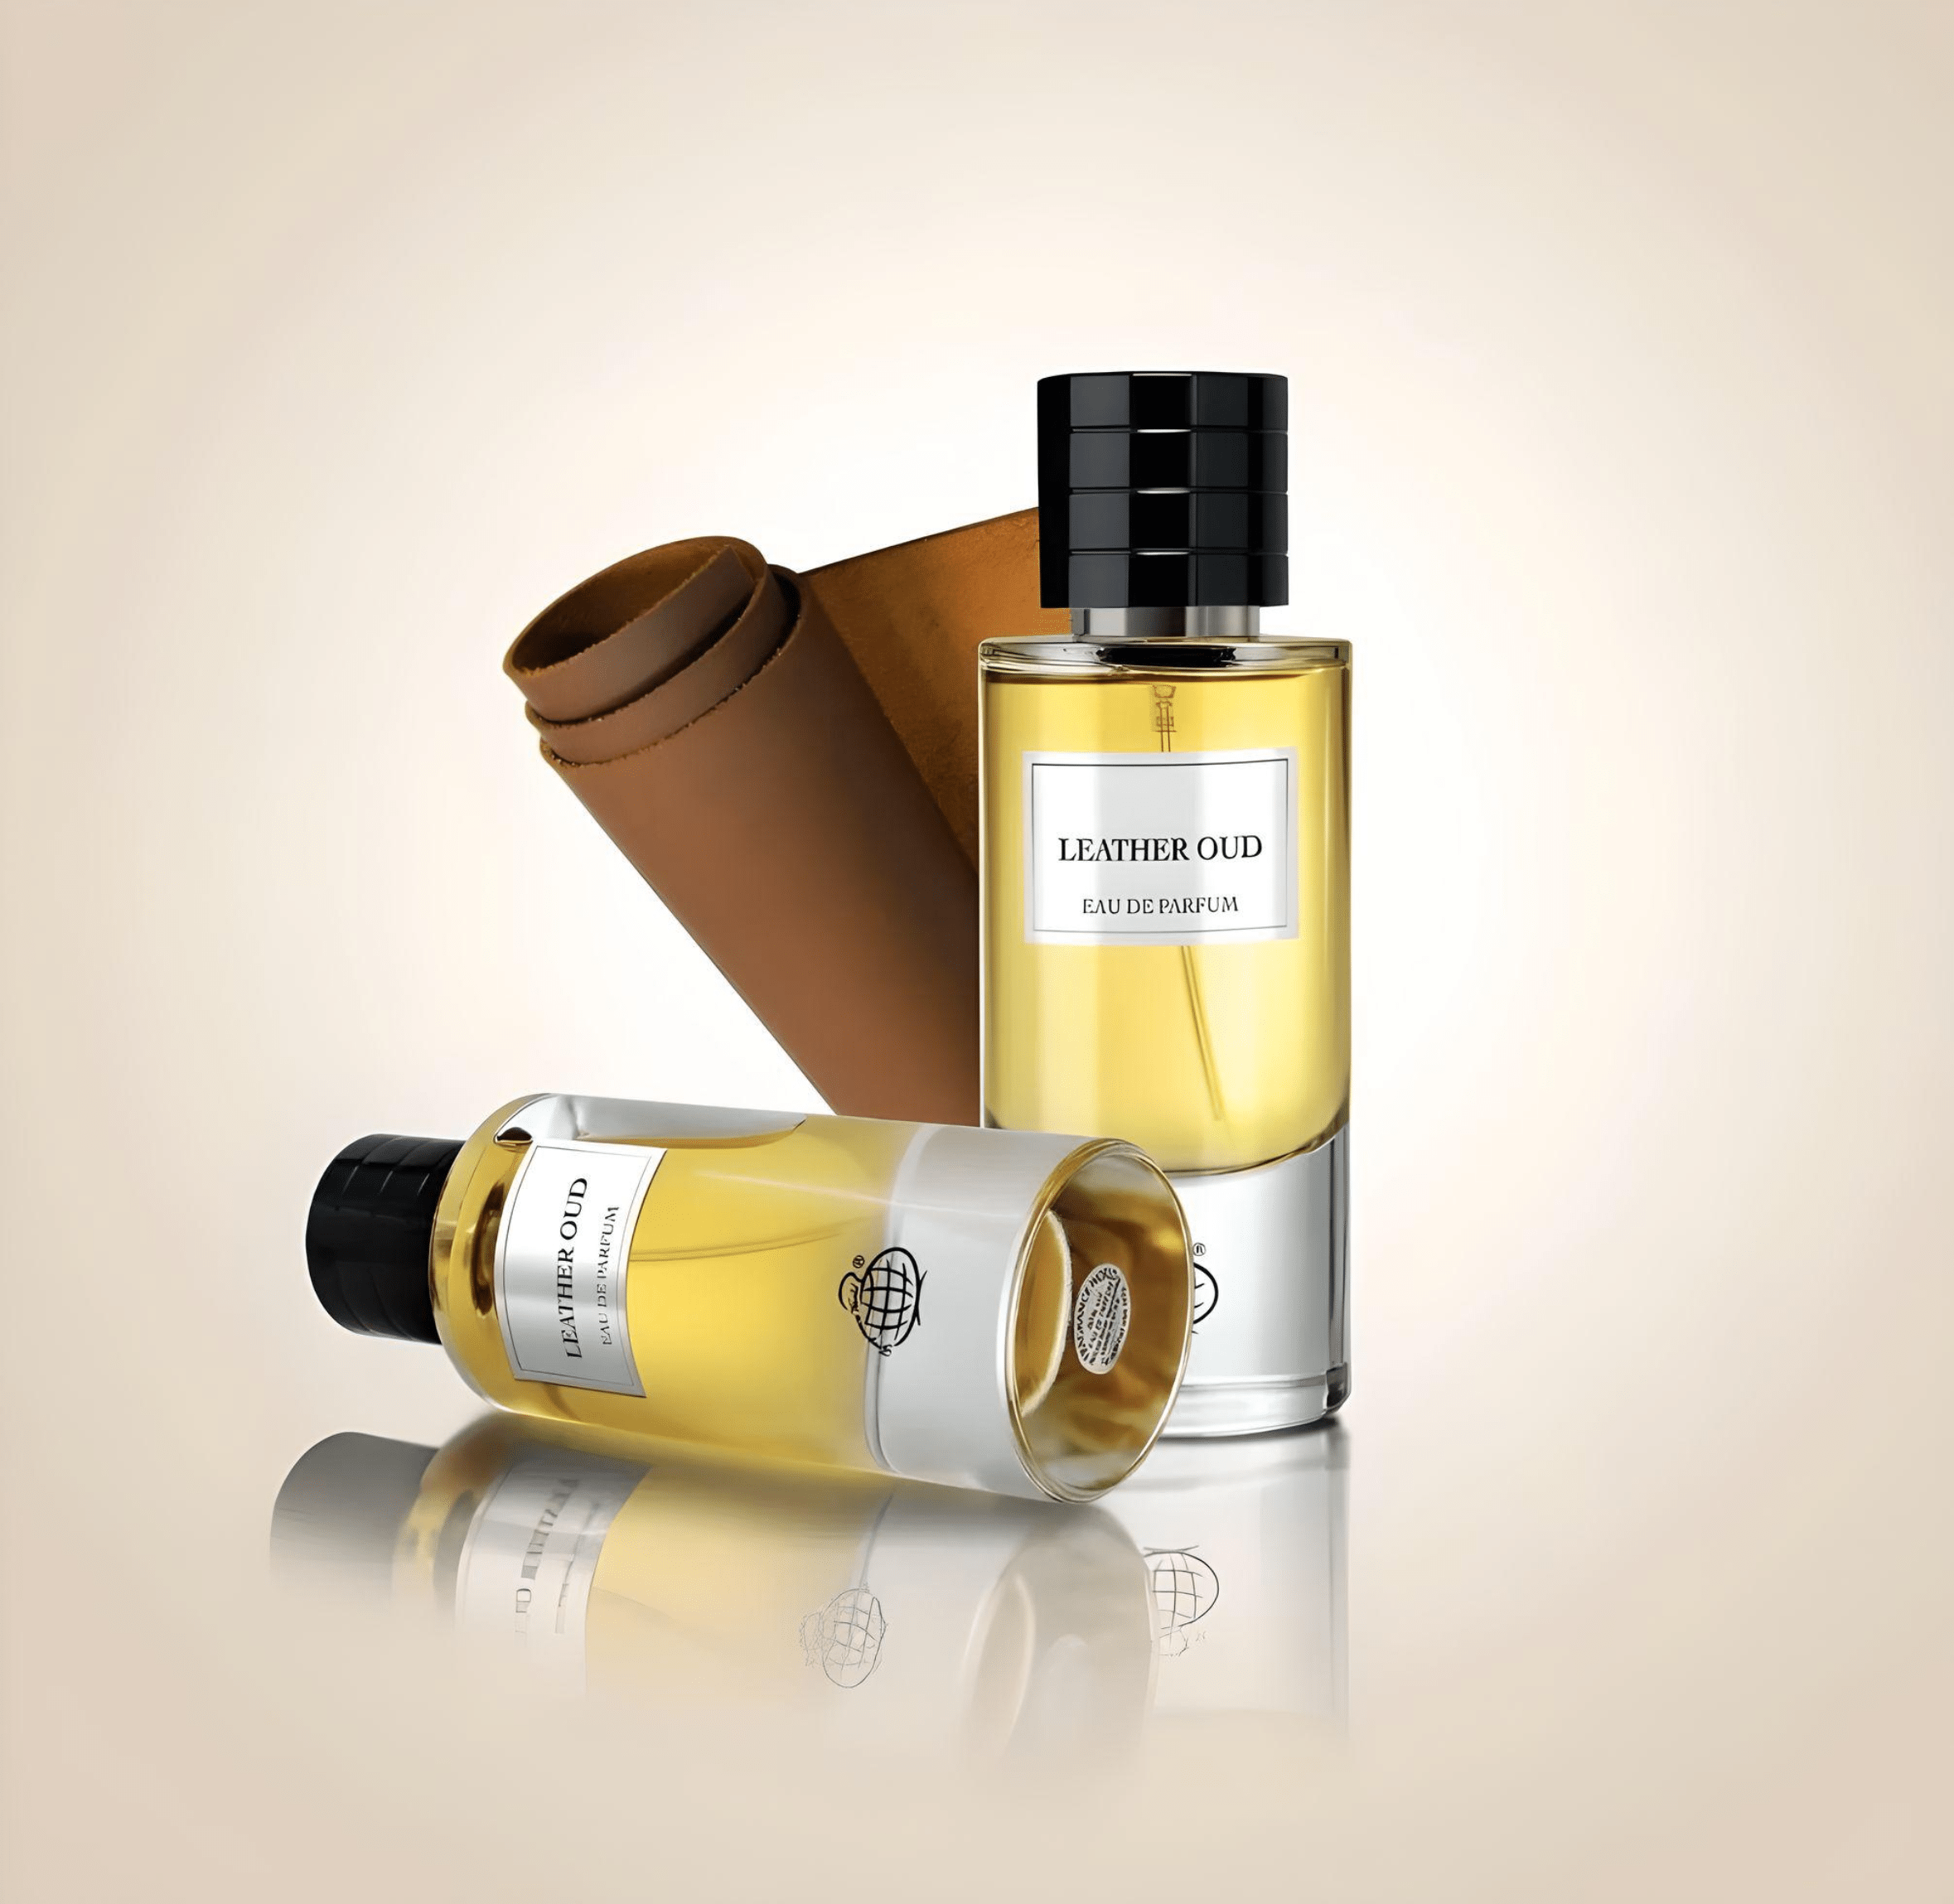 Leather Oud Perfume / Eau De Parfum By Fragrance World (Inspired By Leather Oud)